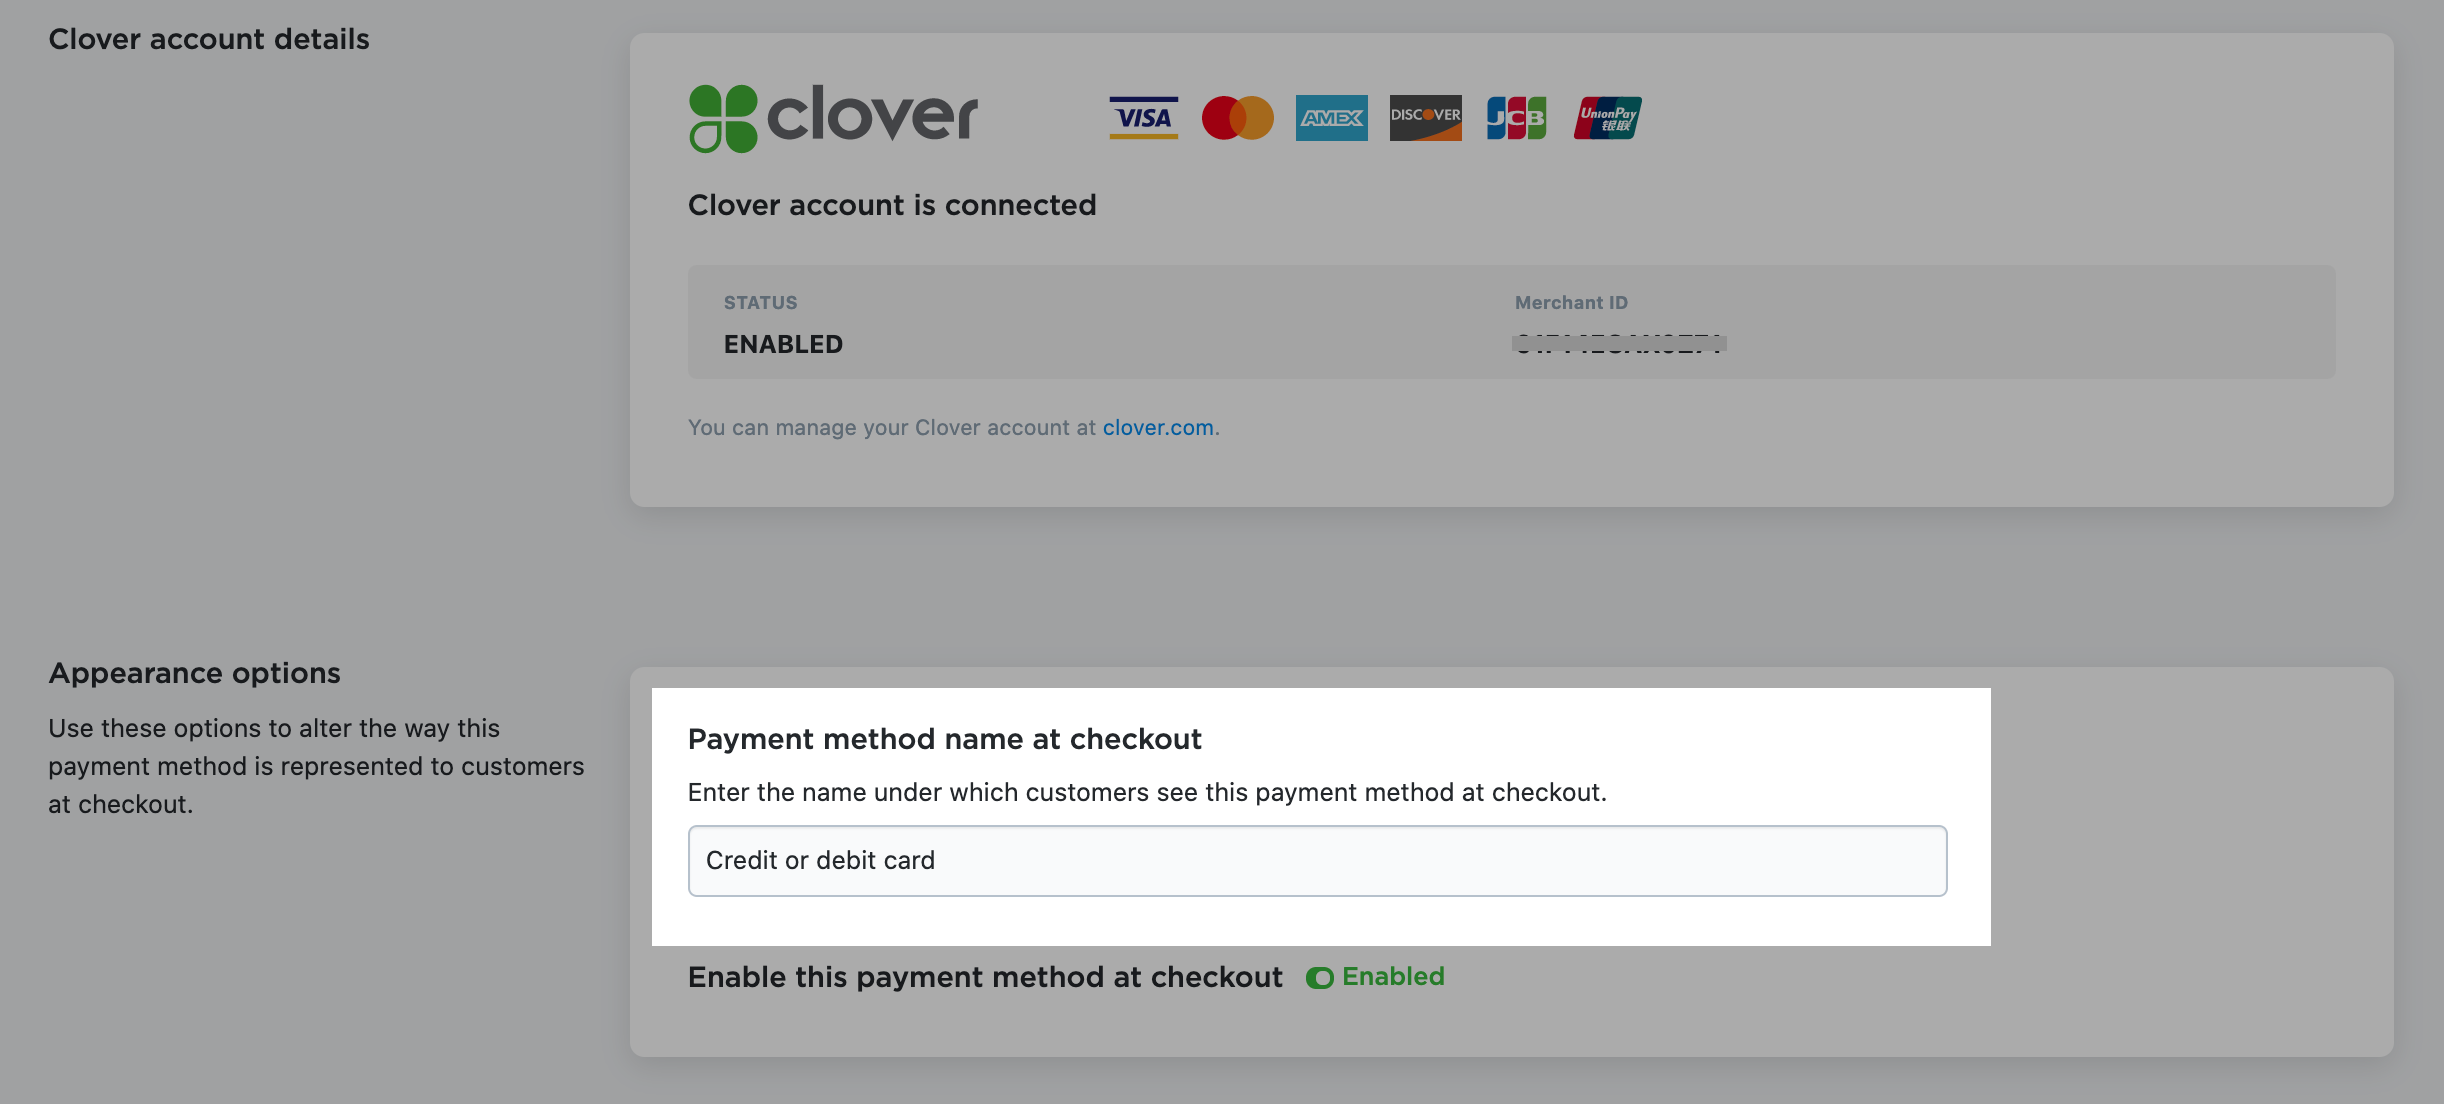 Clover_payment_method.png